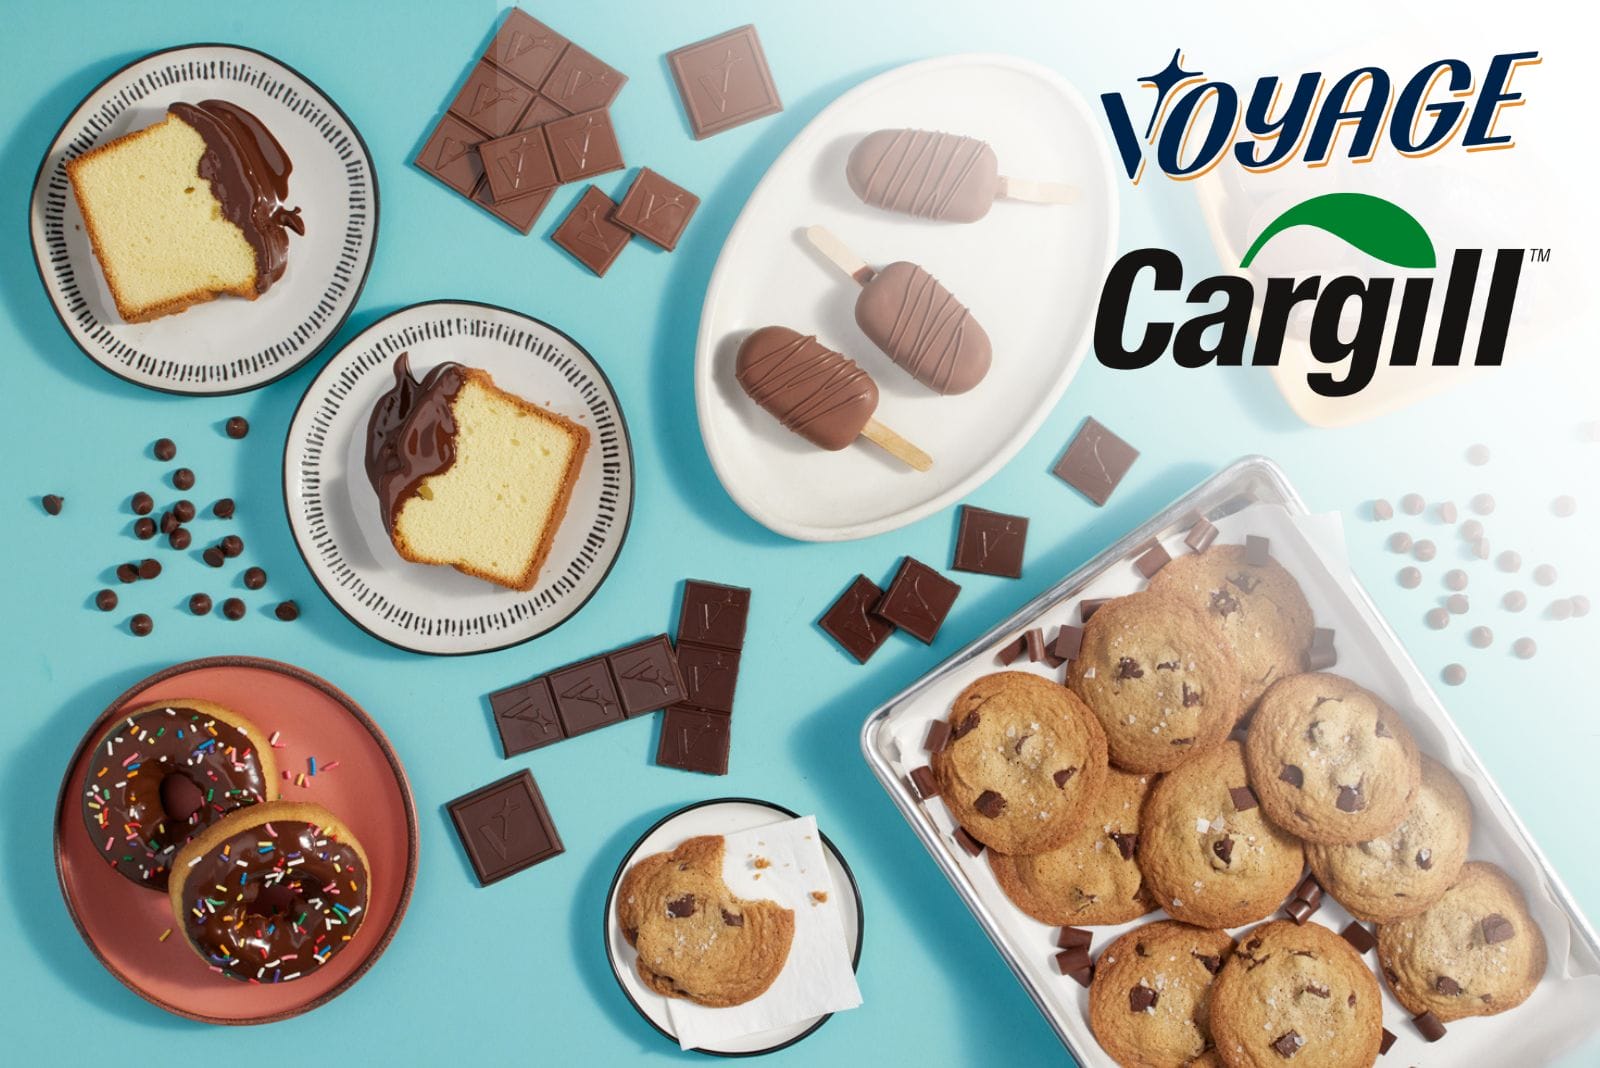 Voyage foods and Cargill logos on top of varying chocolate-flavored baked goods